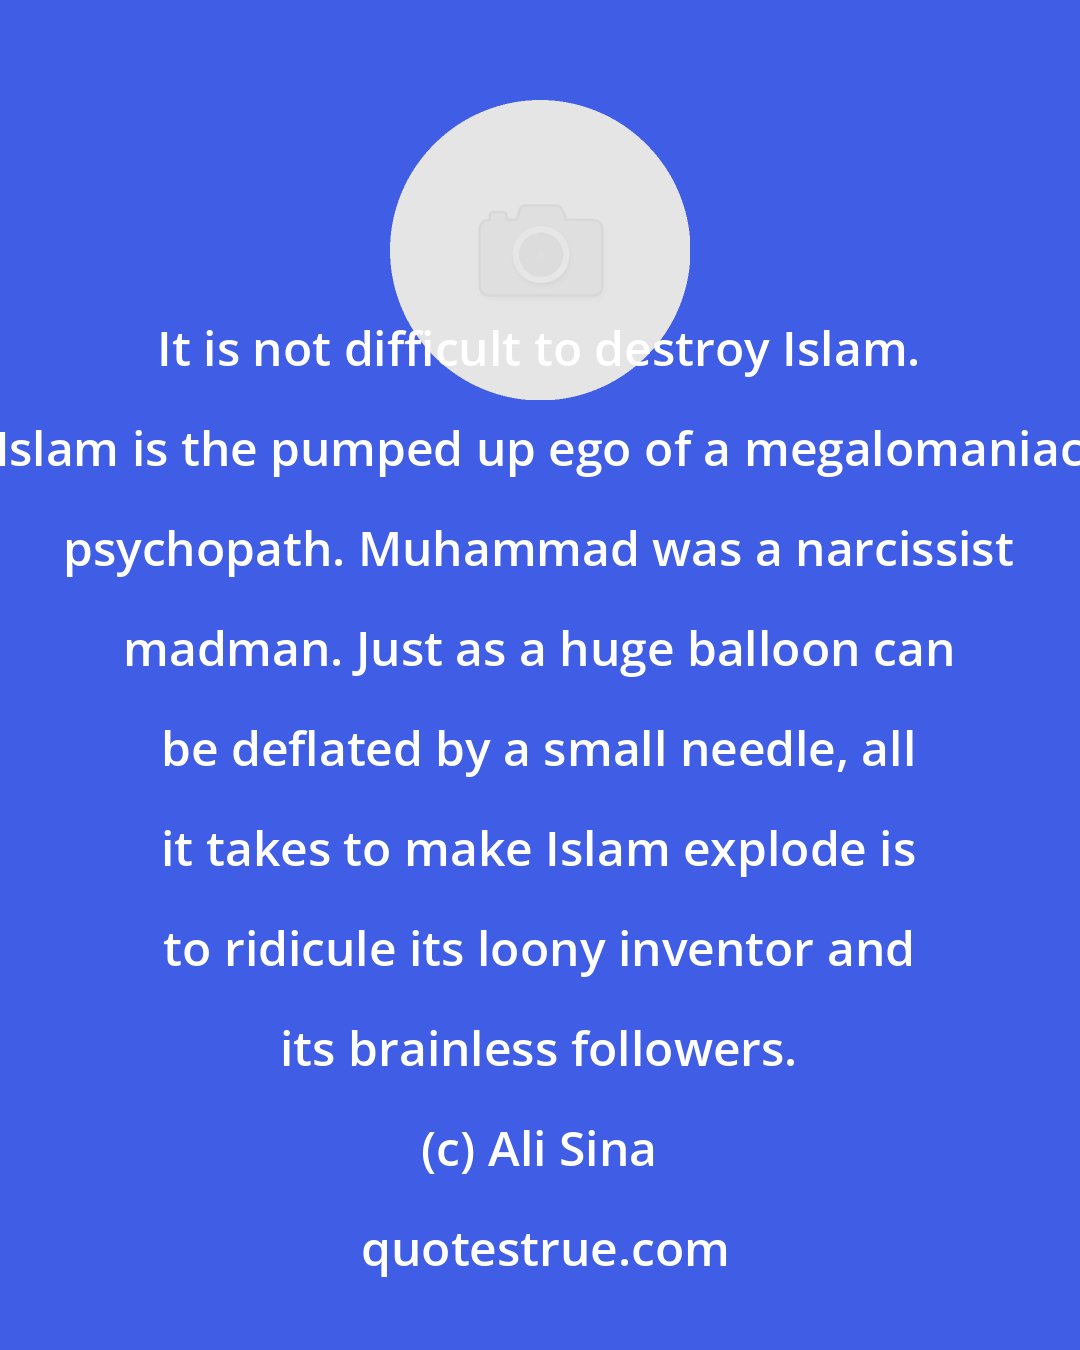 Ali Sina: It is not difficult to destroy Islam. Islam is the pumped up ego of a megalomaniac psychopath. Muhammad was a narcissist madman. Just as a huge balloon can be deflated by a small needle, all it takes to make Islam explode is to ridicule its loony inventor and its brainless followers.